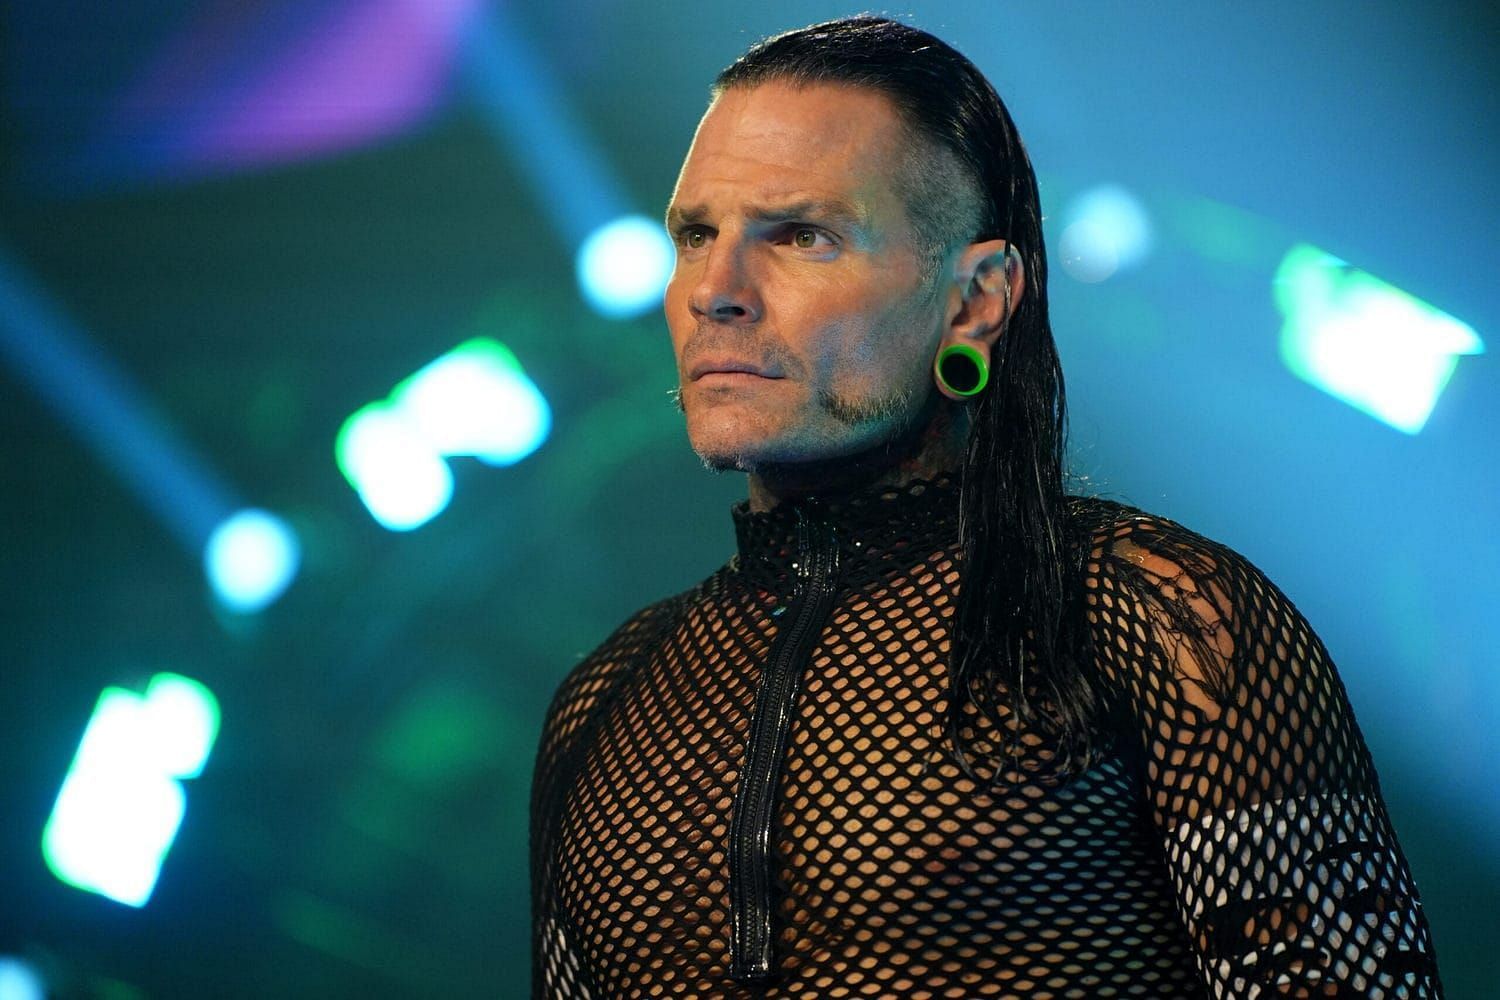 Jeff Hardy is now signed to AEW